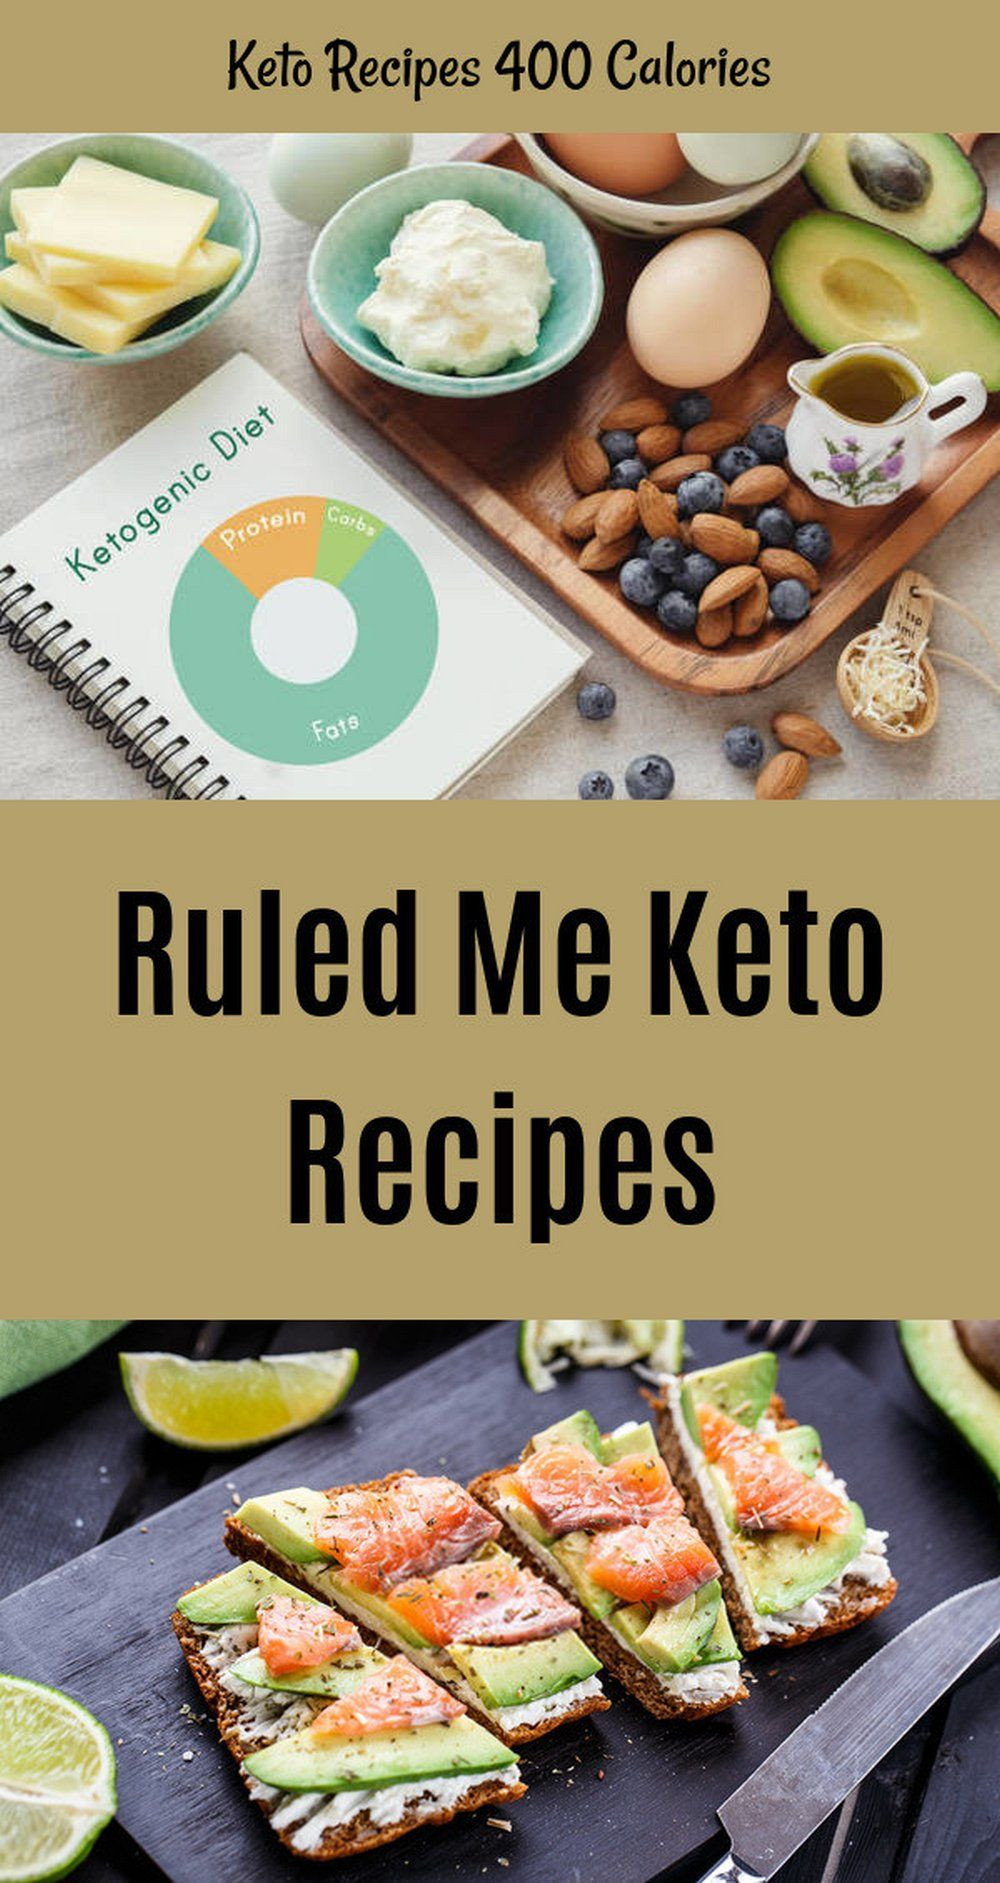 Ruled.me Keto Diet Recipes
 Ruled Me Keto Recipes Keto Cooking Food Re mendations